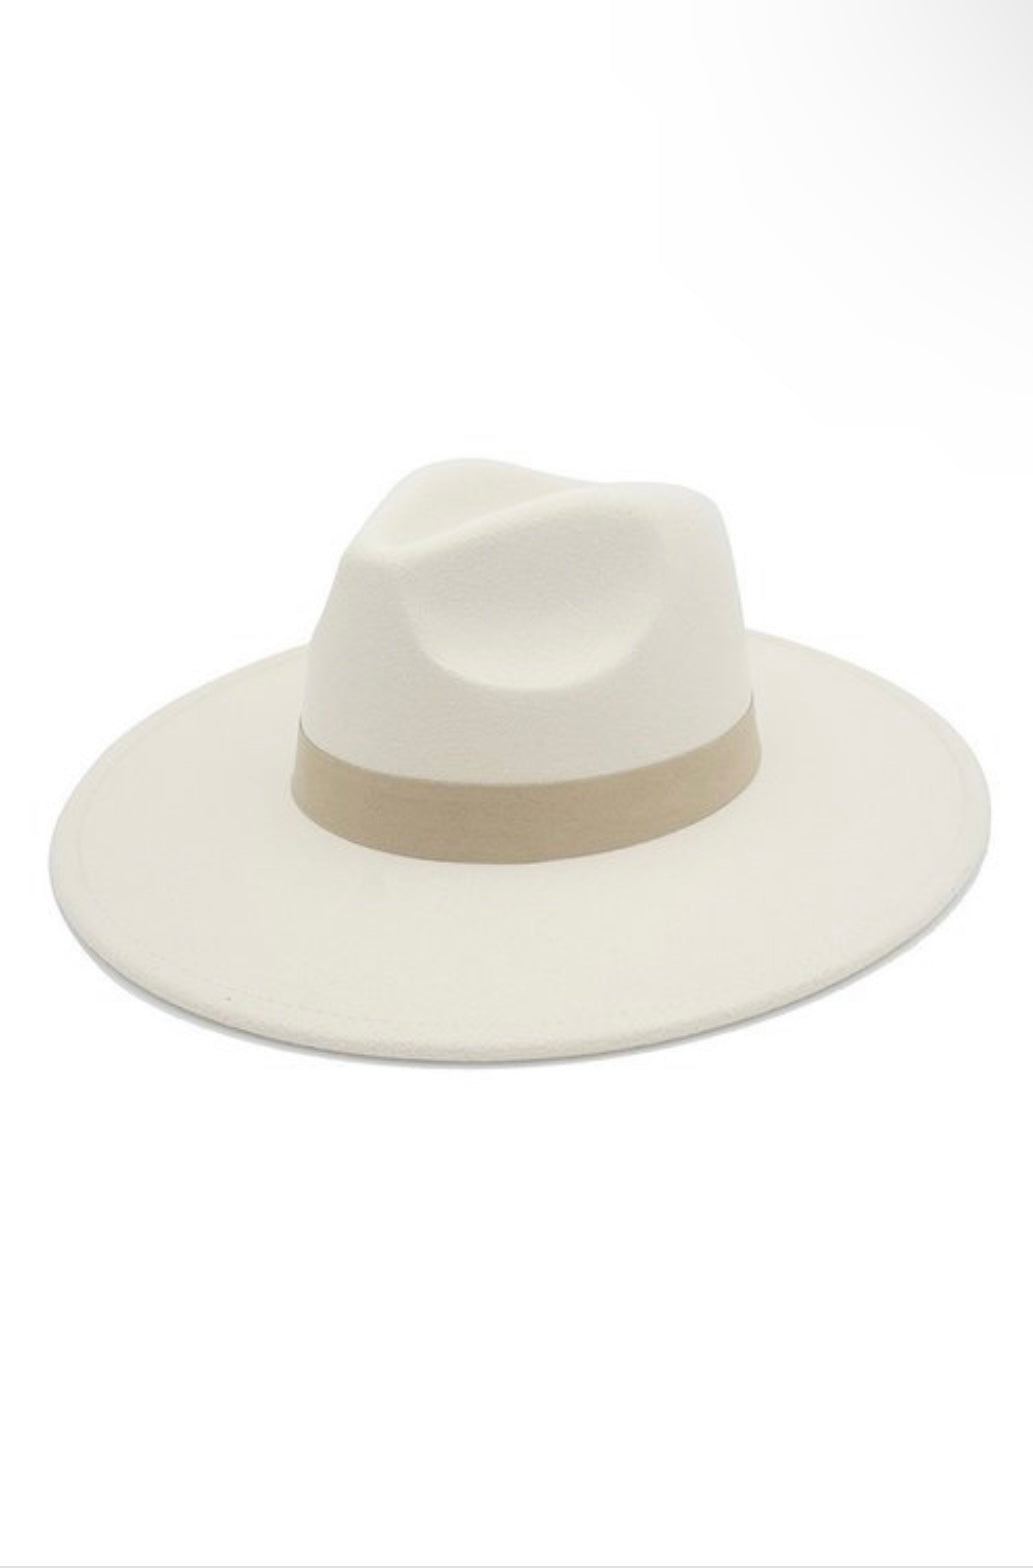 Basic Fedora - Corinne Boutique Family Owned and Operated USA